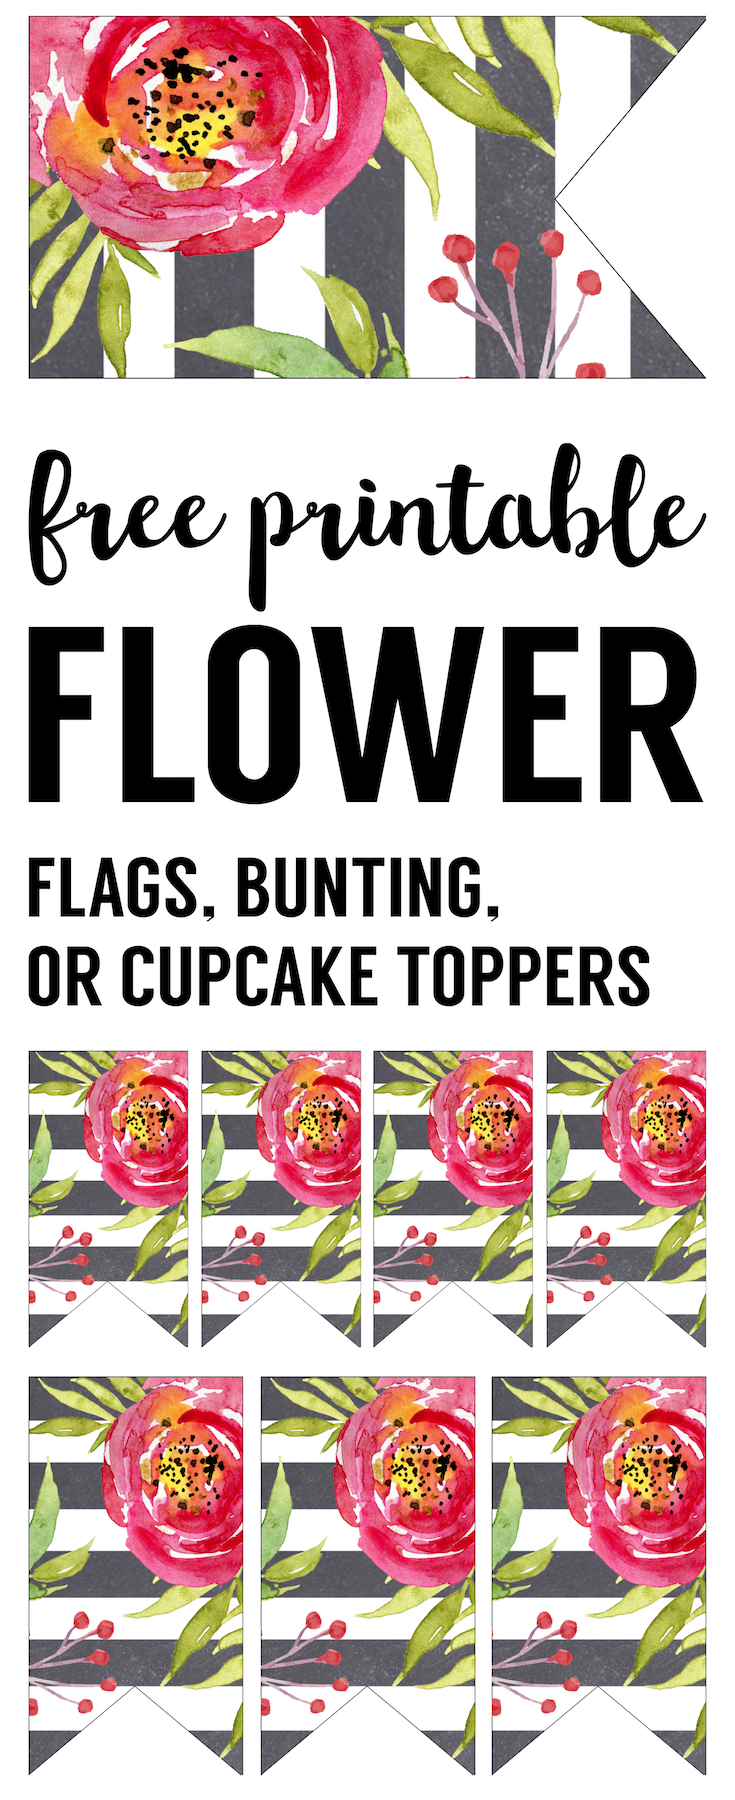 Flower Cupcake Topper Flags Free Printable. Floral bunting free printable for a garden party, baby shower, wedding, Easter or Spring party, bridal shower, or birthday party decorations. 